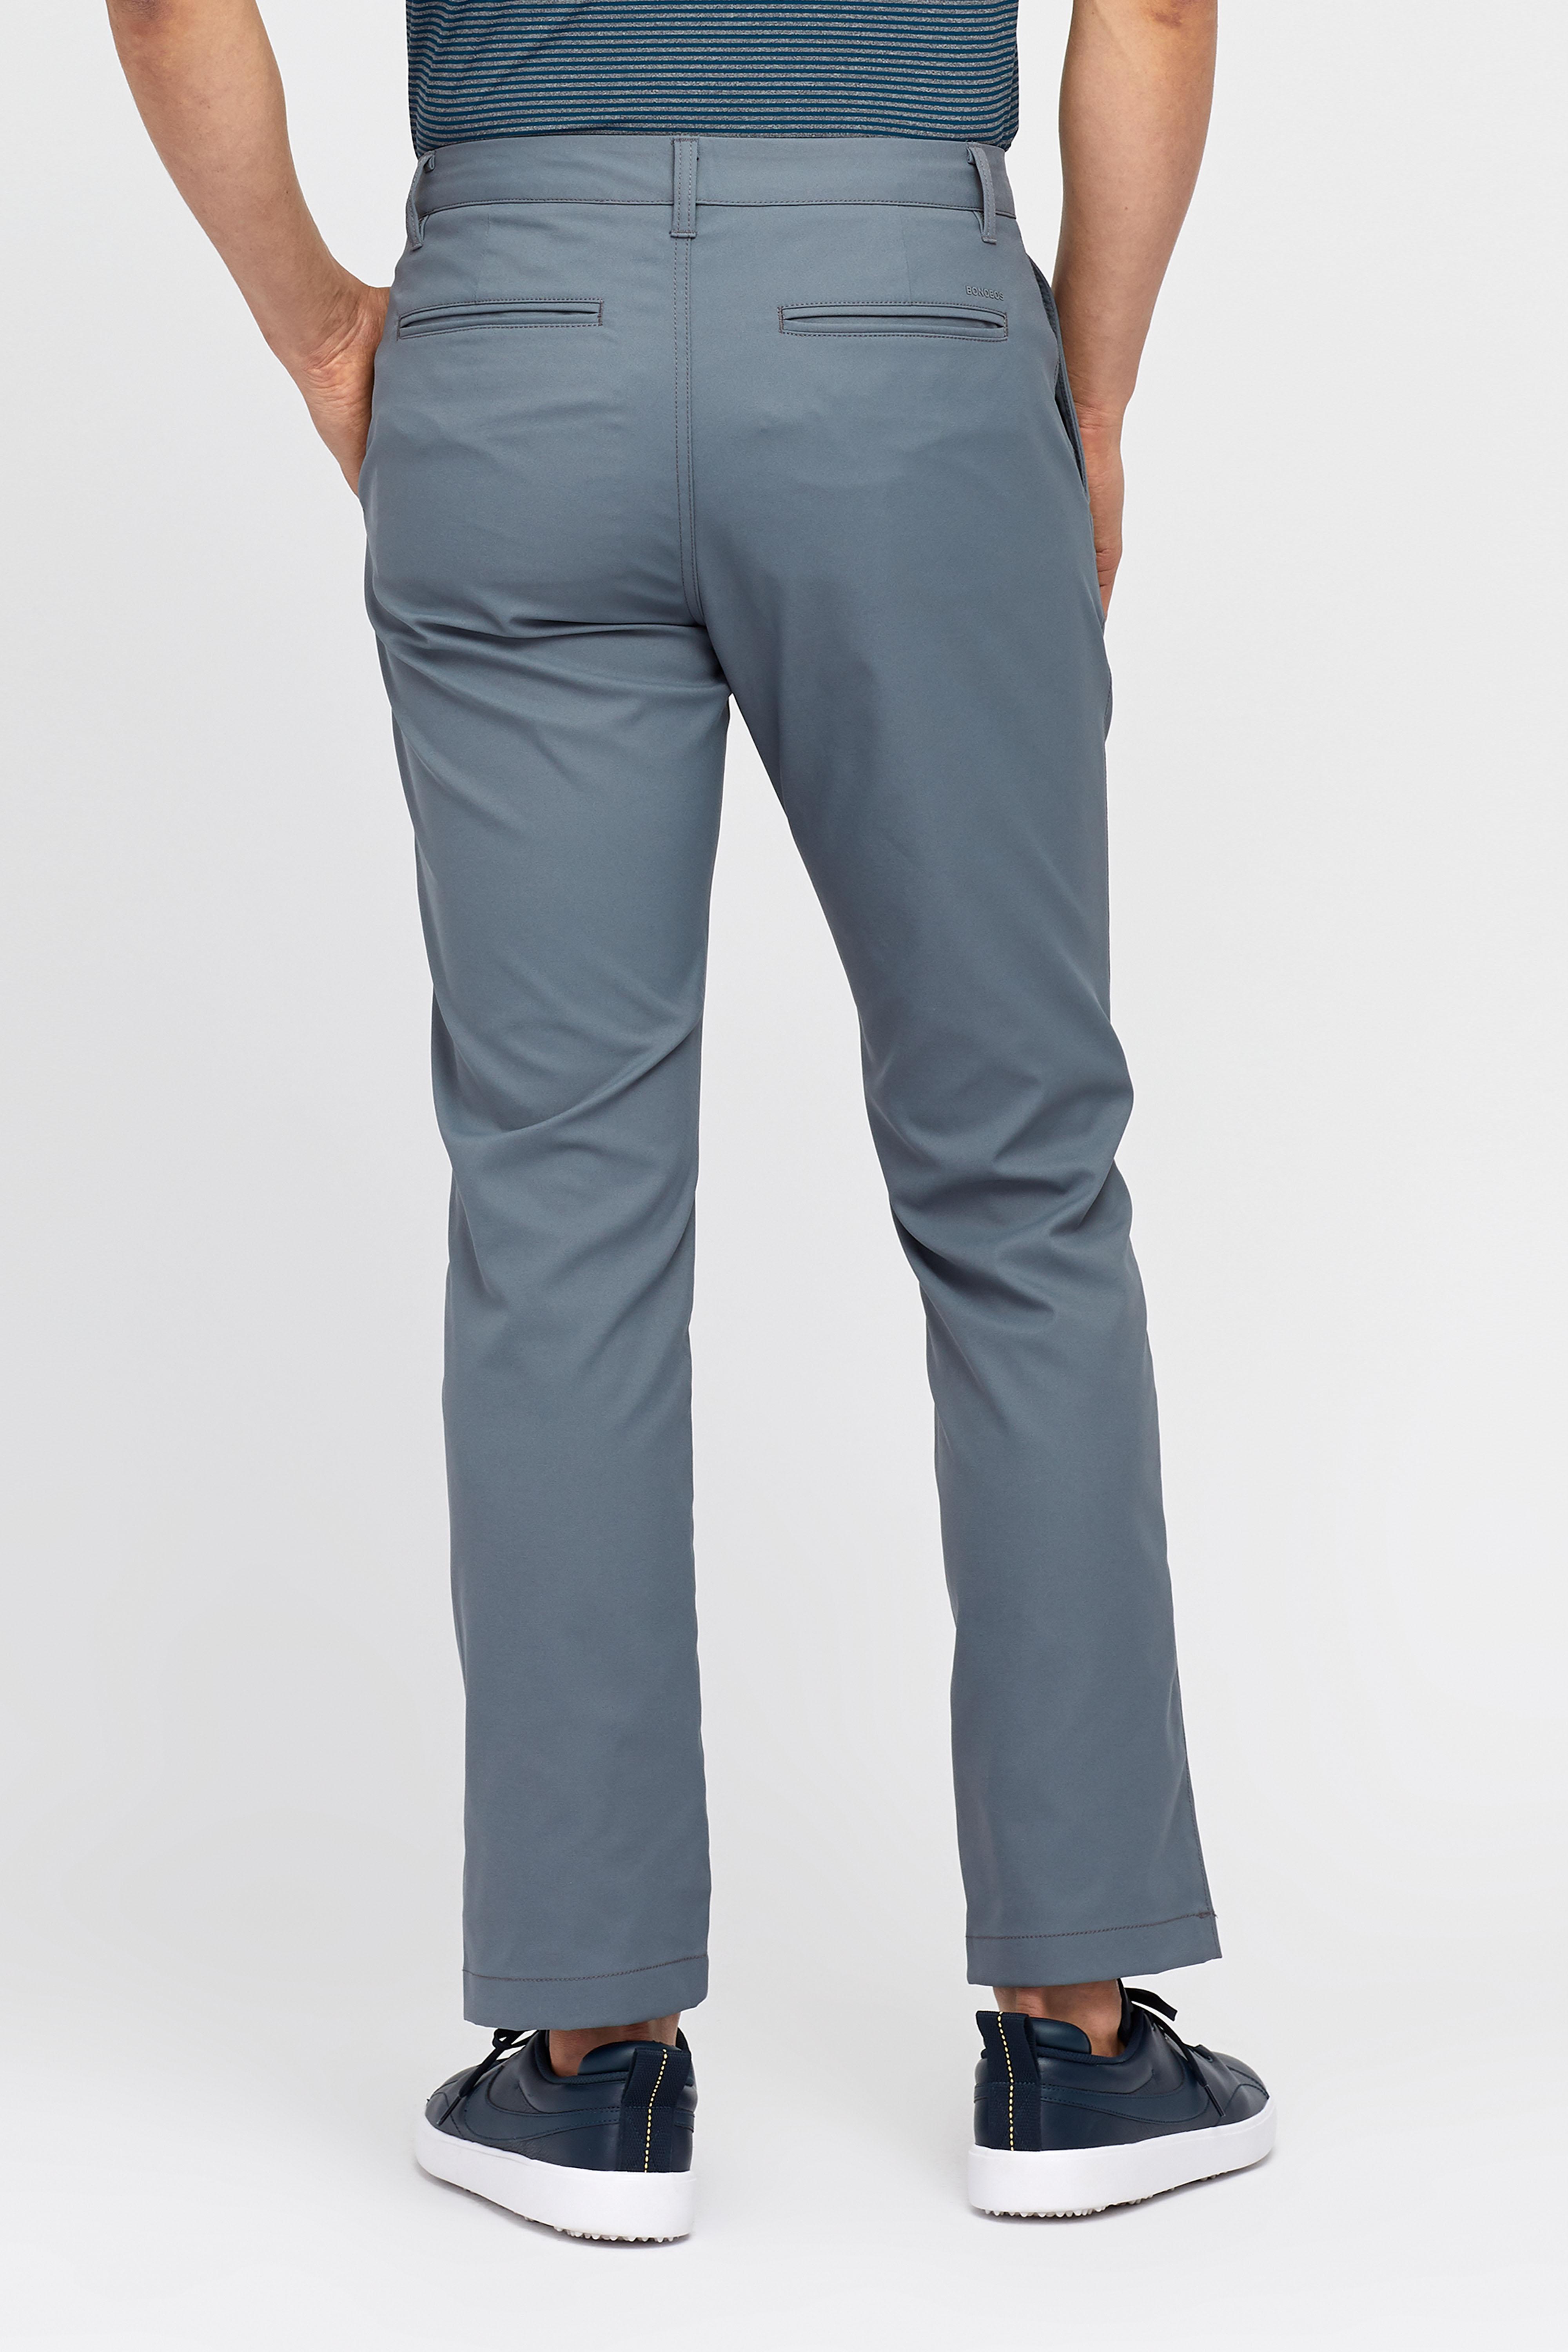 Bonobos Synthetic Highland Golf Pants in Grey (Gray) for Men - Lyst